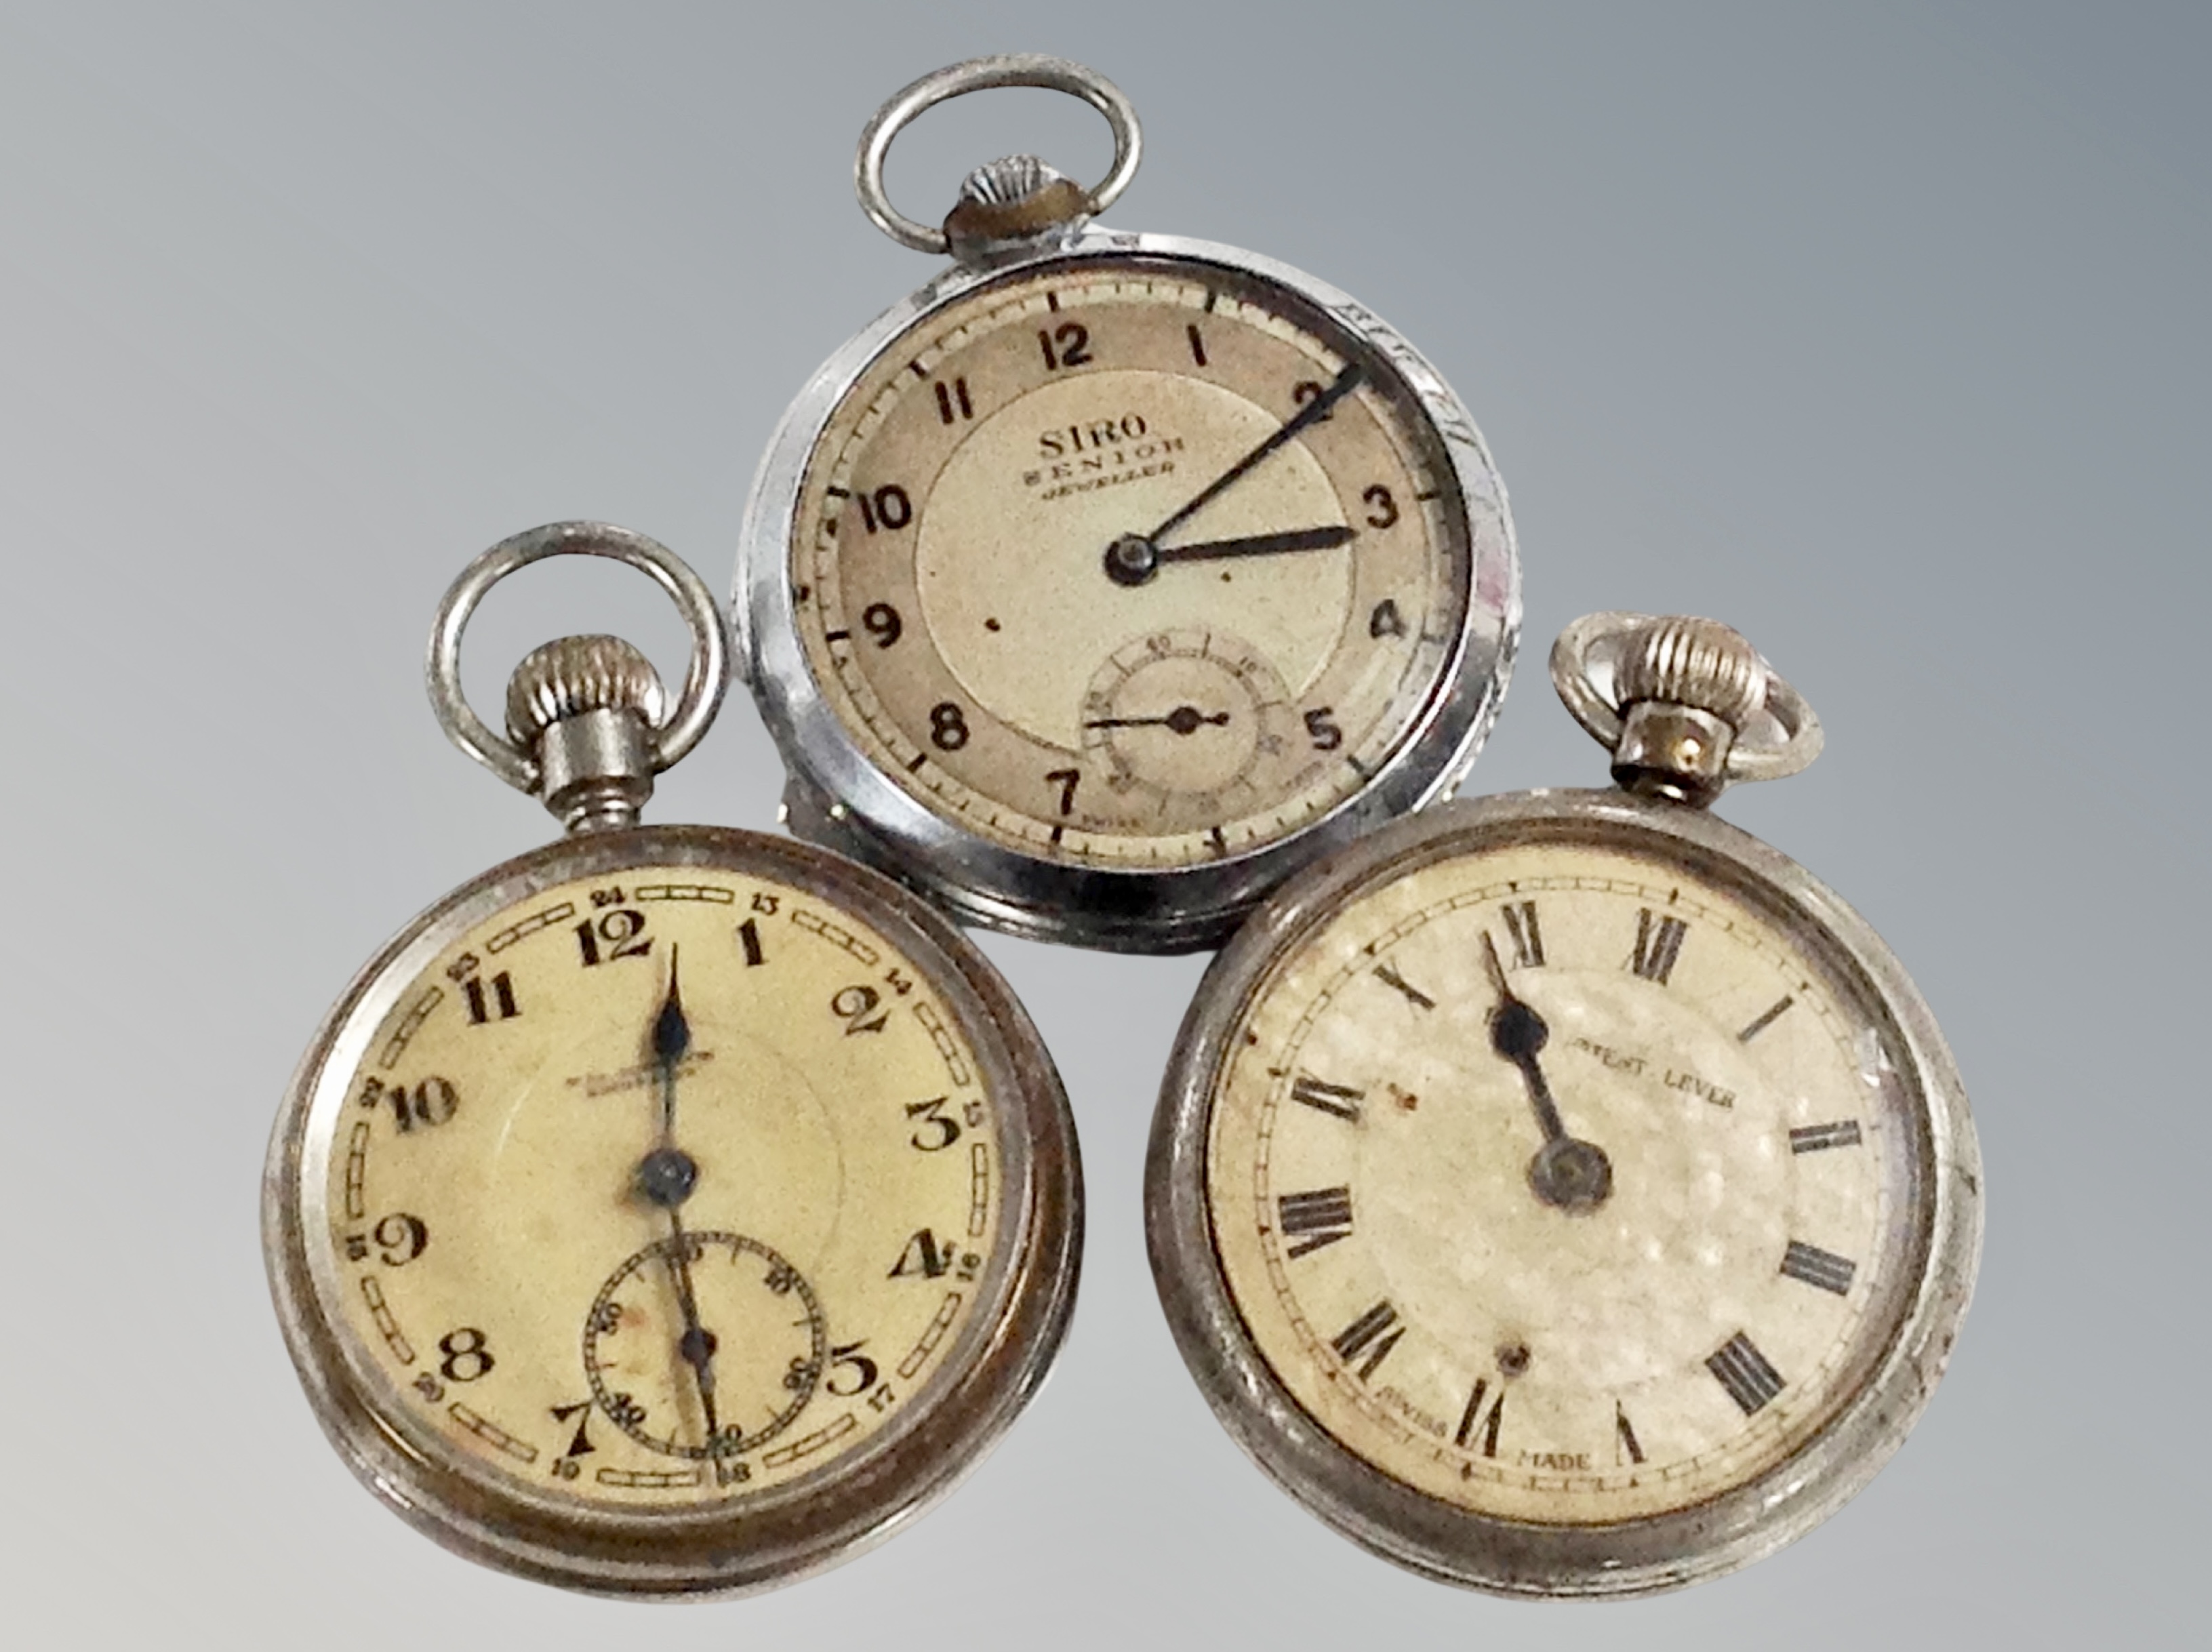 A Ciro Senior pocket watch and two further pocket watches